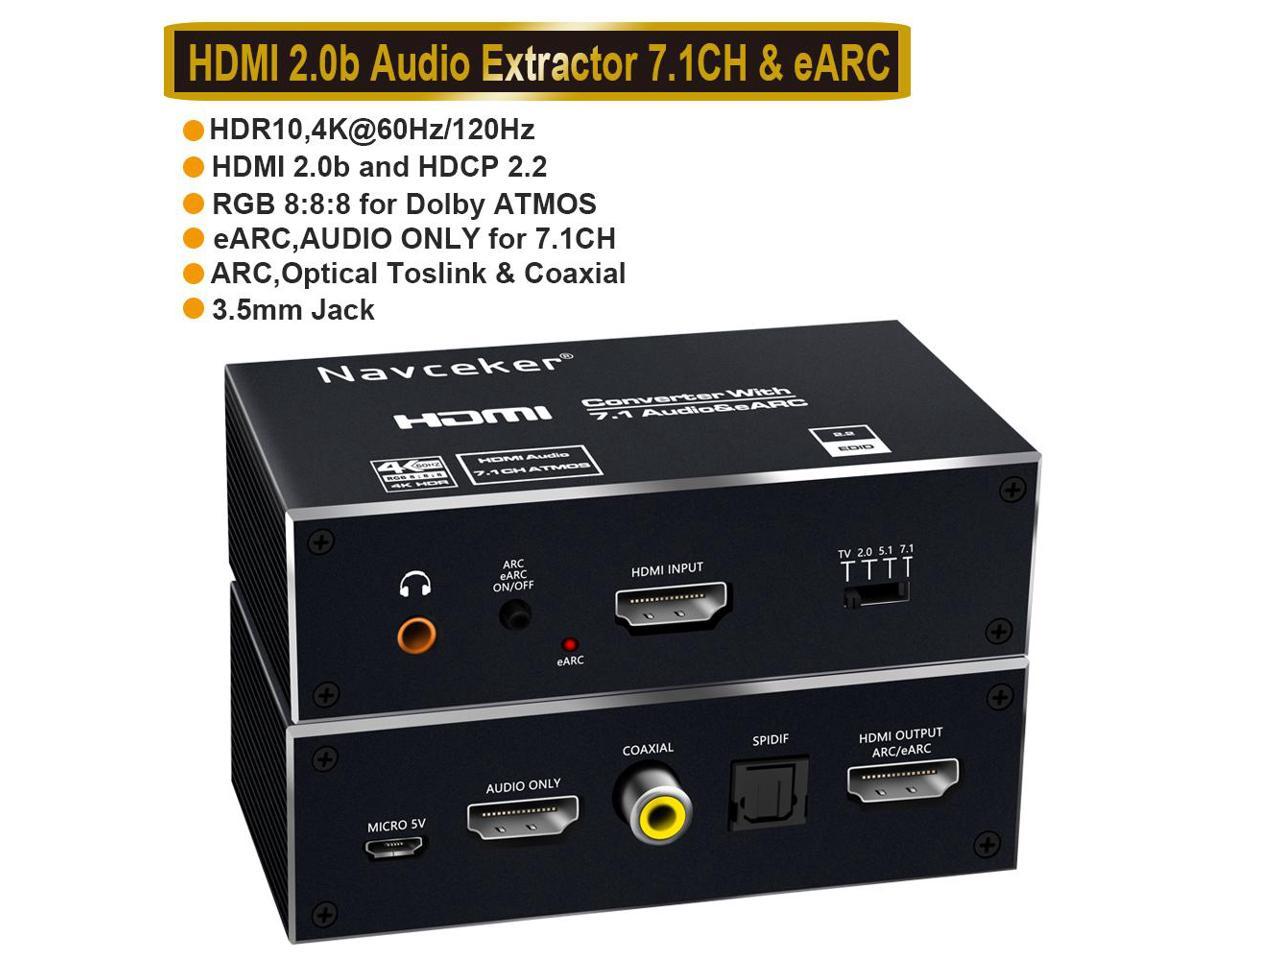 ESTONE 60Hz HDMI eARC/ARC Audio Extractor Splitter, Optical TOSLINK SPDIF 7.1CH, 3.5mm Audio Jack , Support RGB 8:8:8(7.1CH Dolby atmos),EDID, Dolby Vision,HDR 10 - Newegg.com